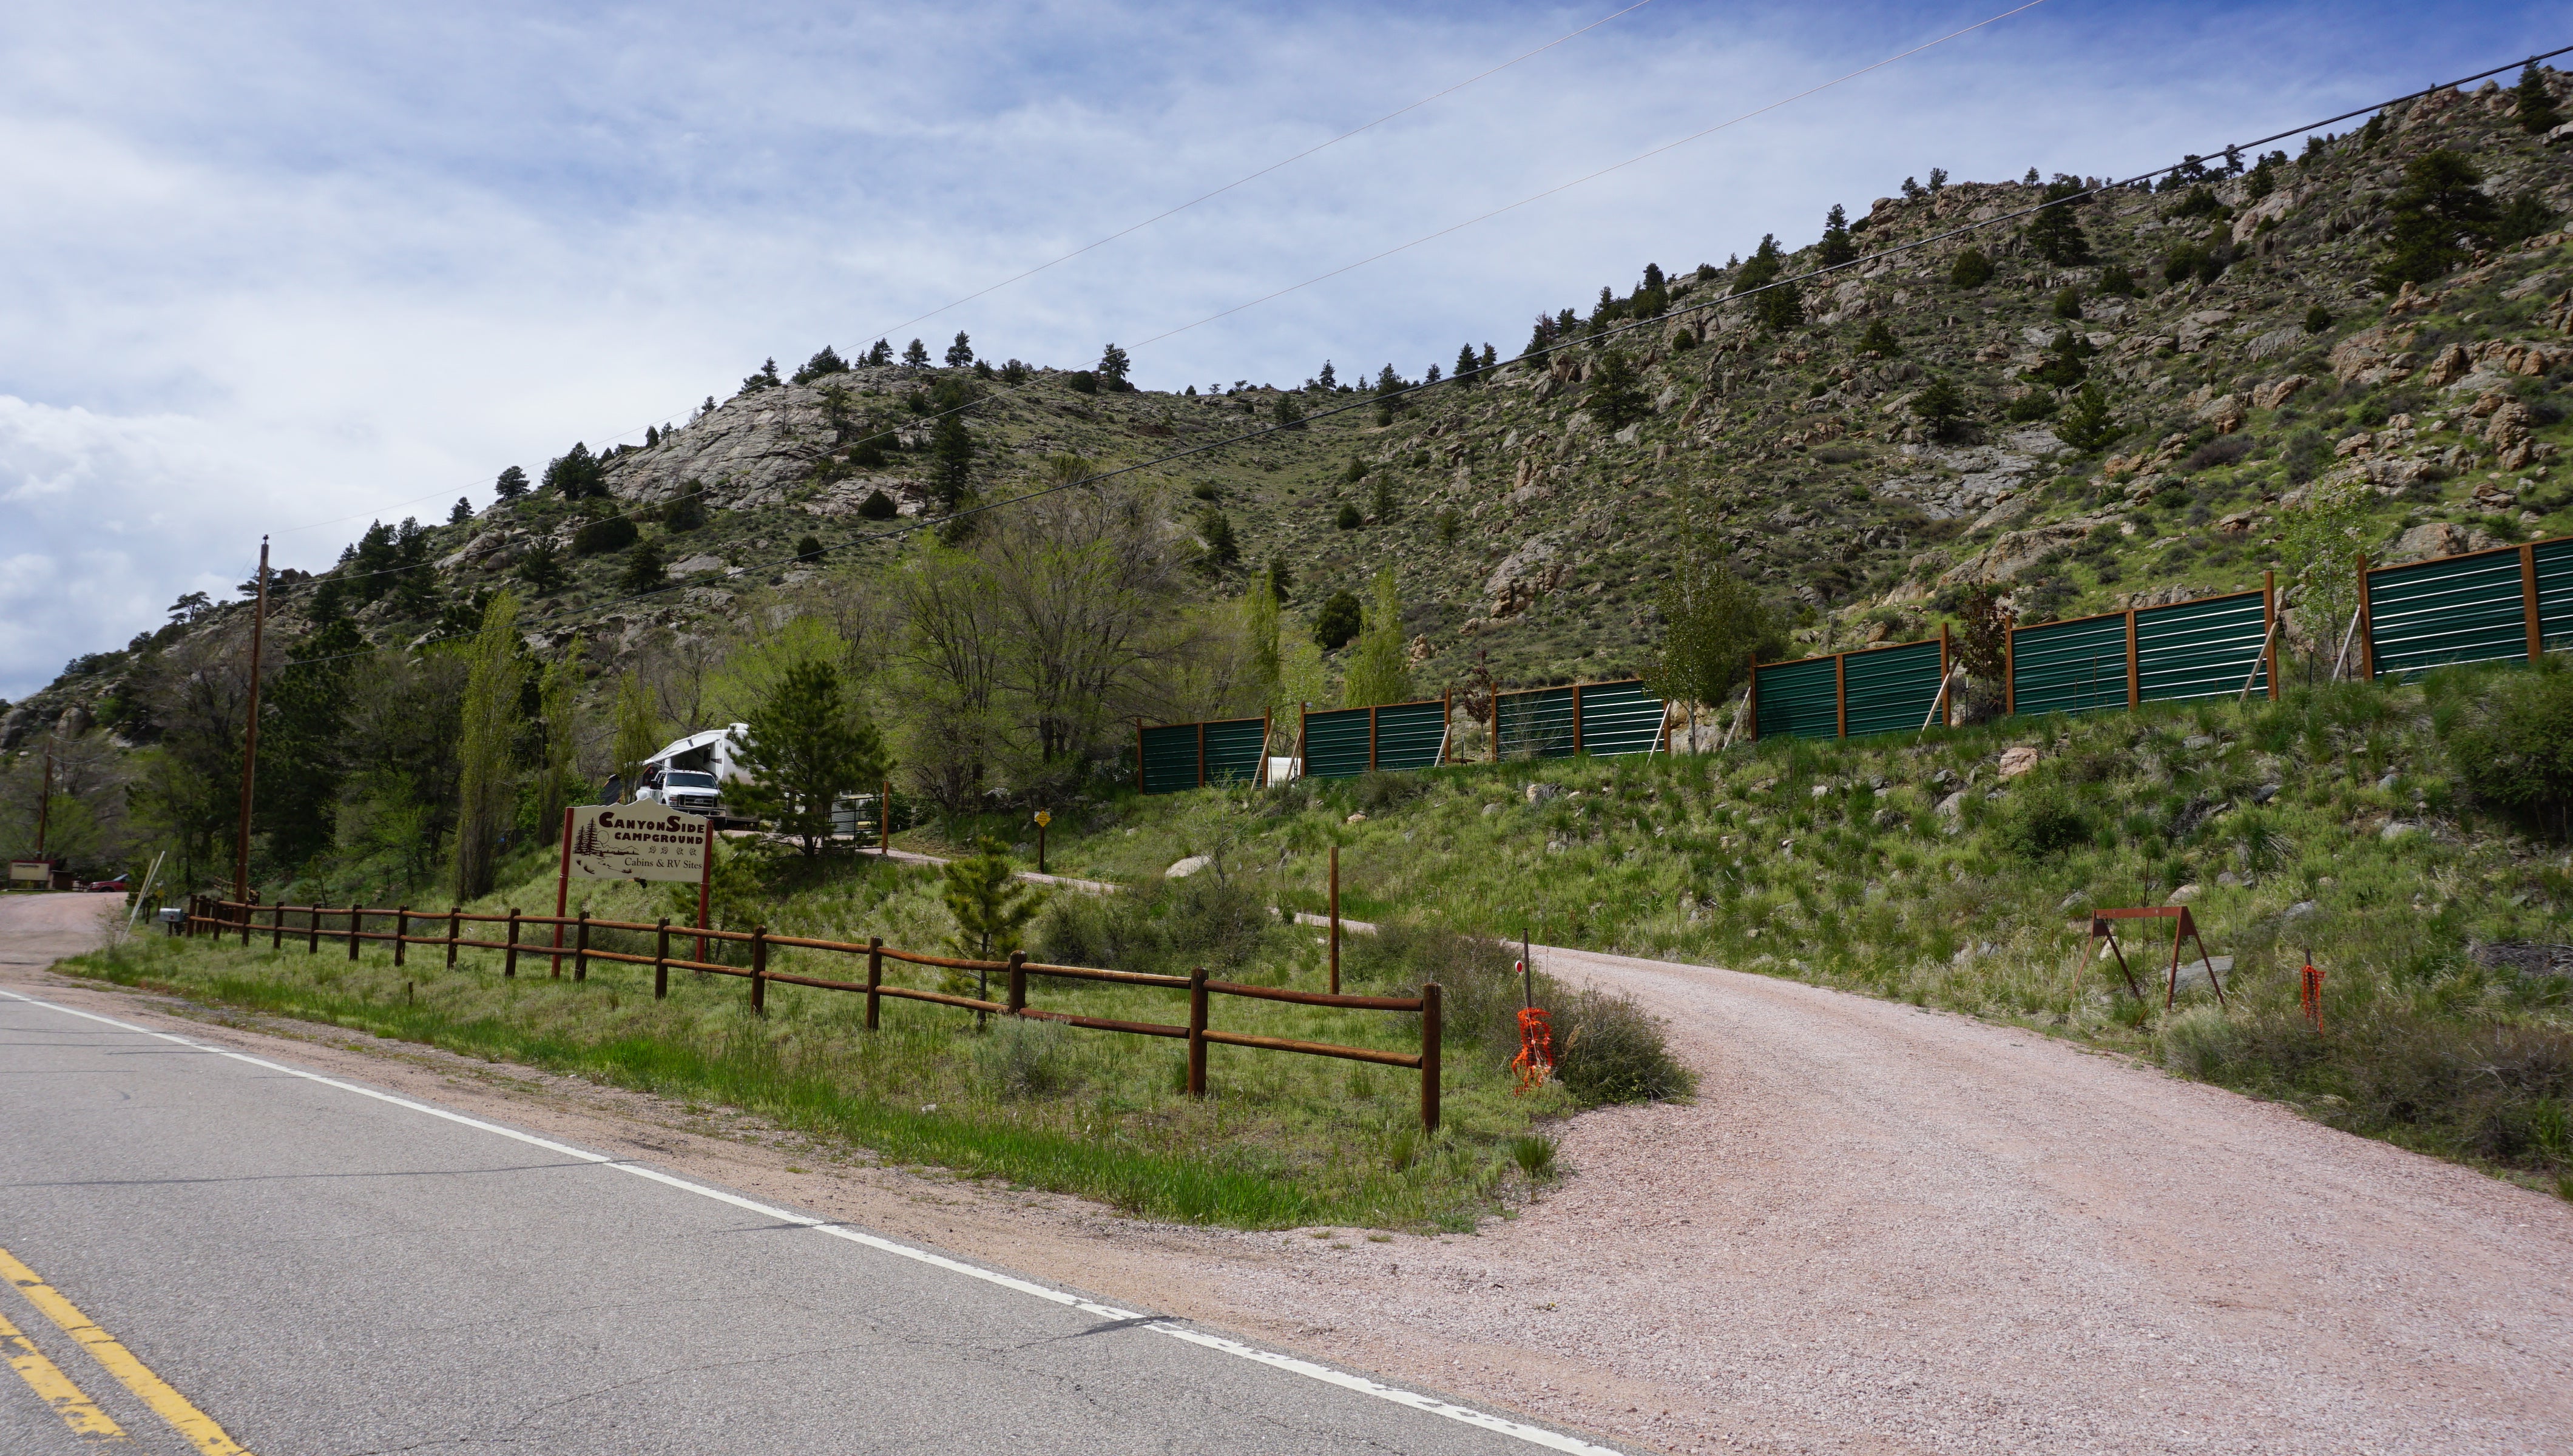 main entrance to the CanyonSide campground